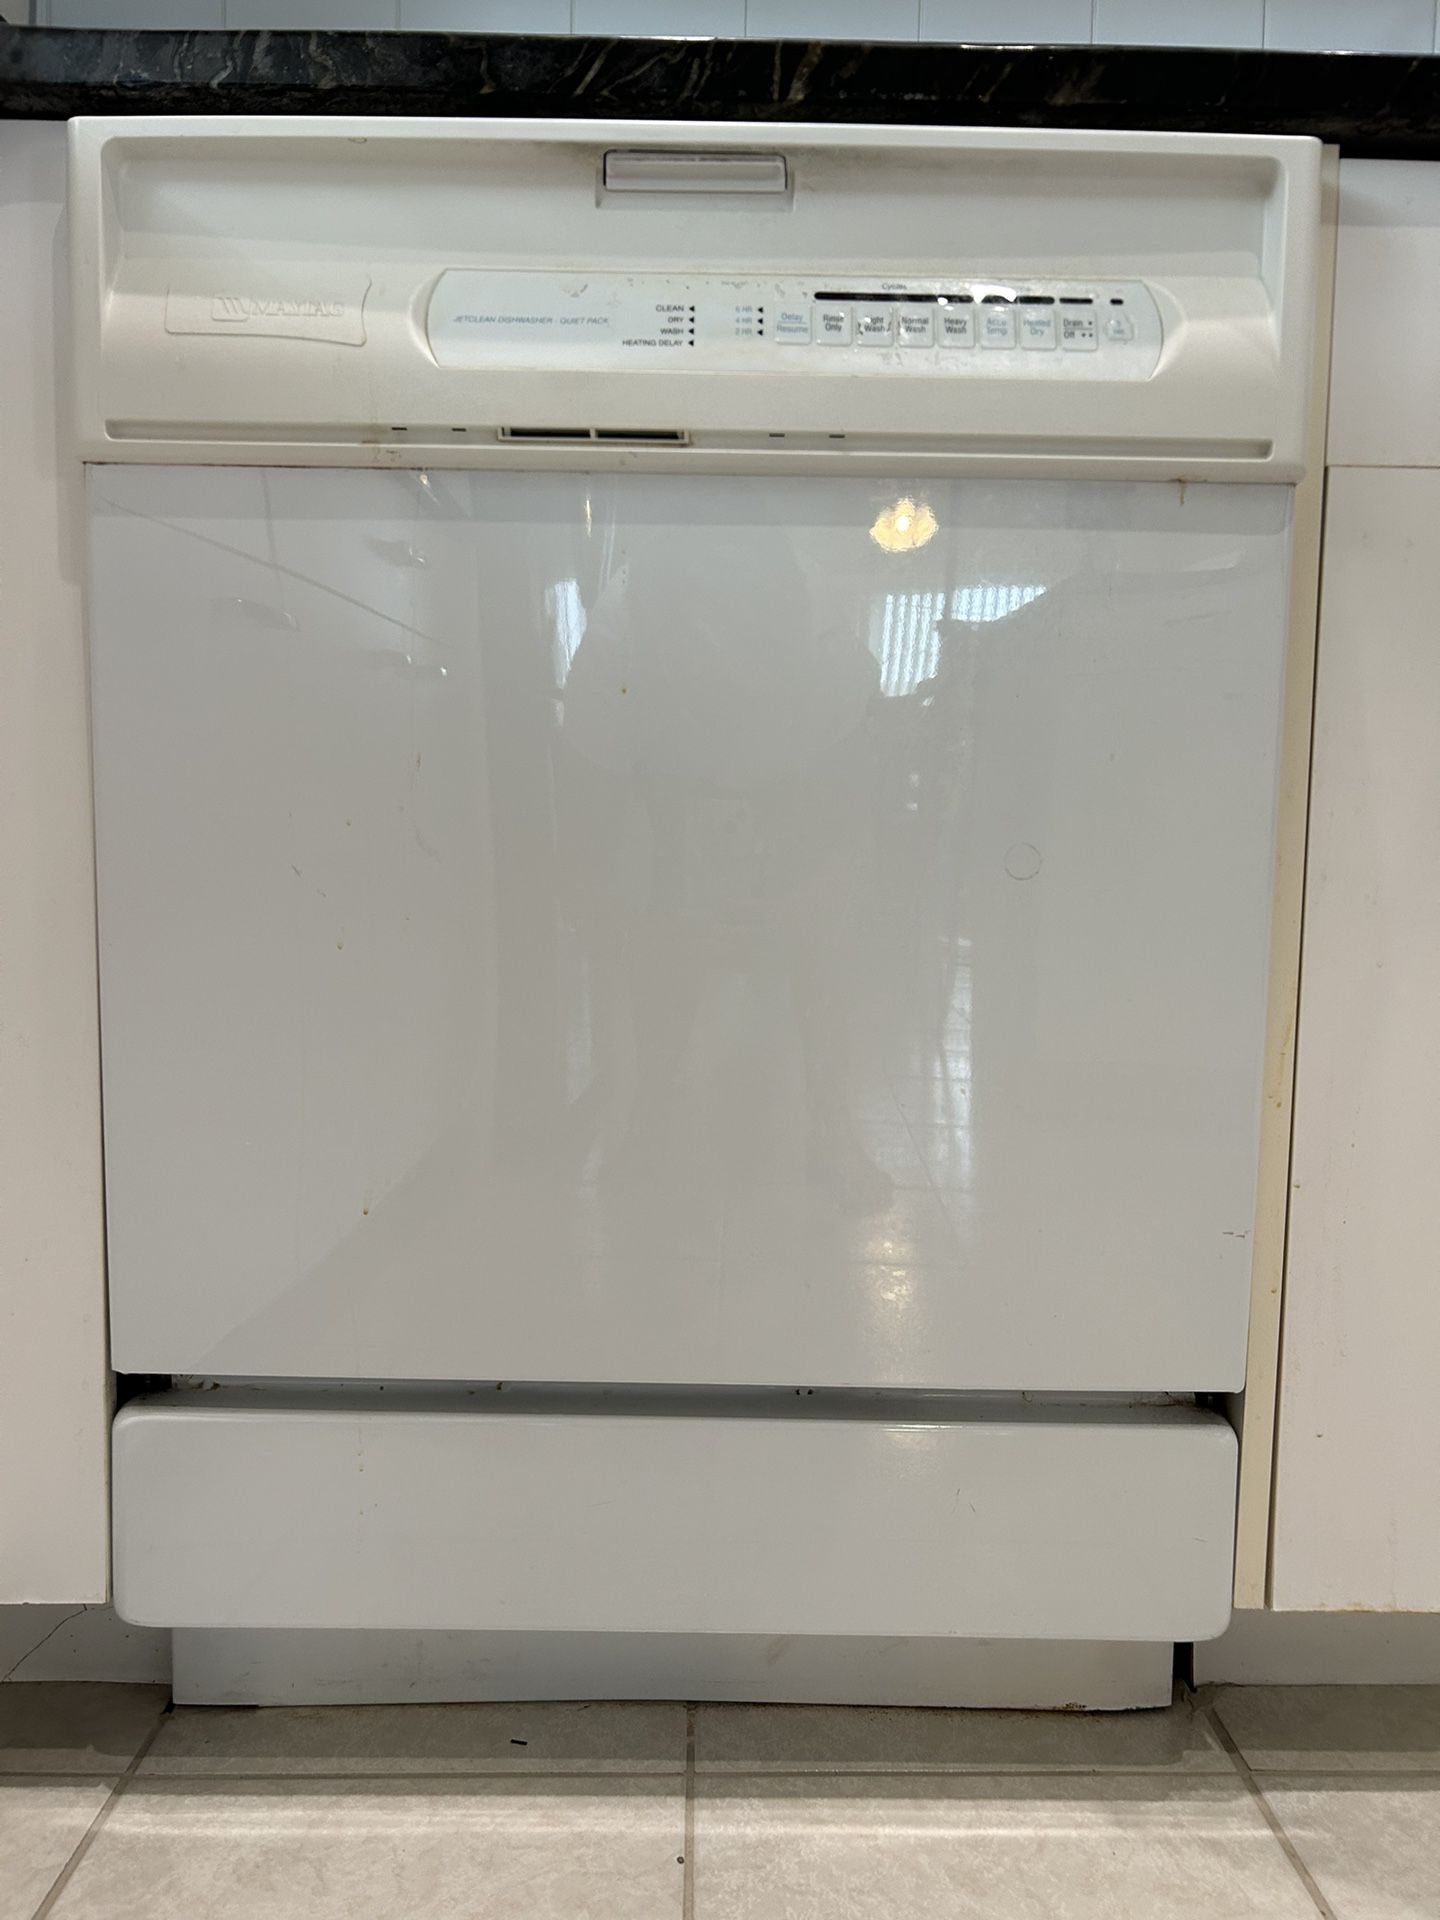 FREE Dishwasher and Microwave